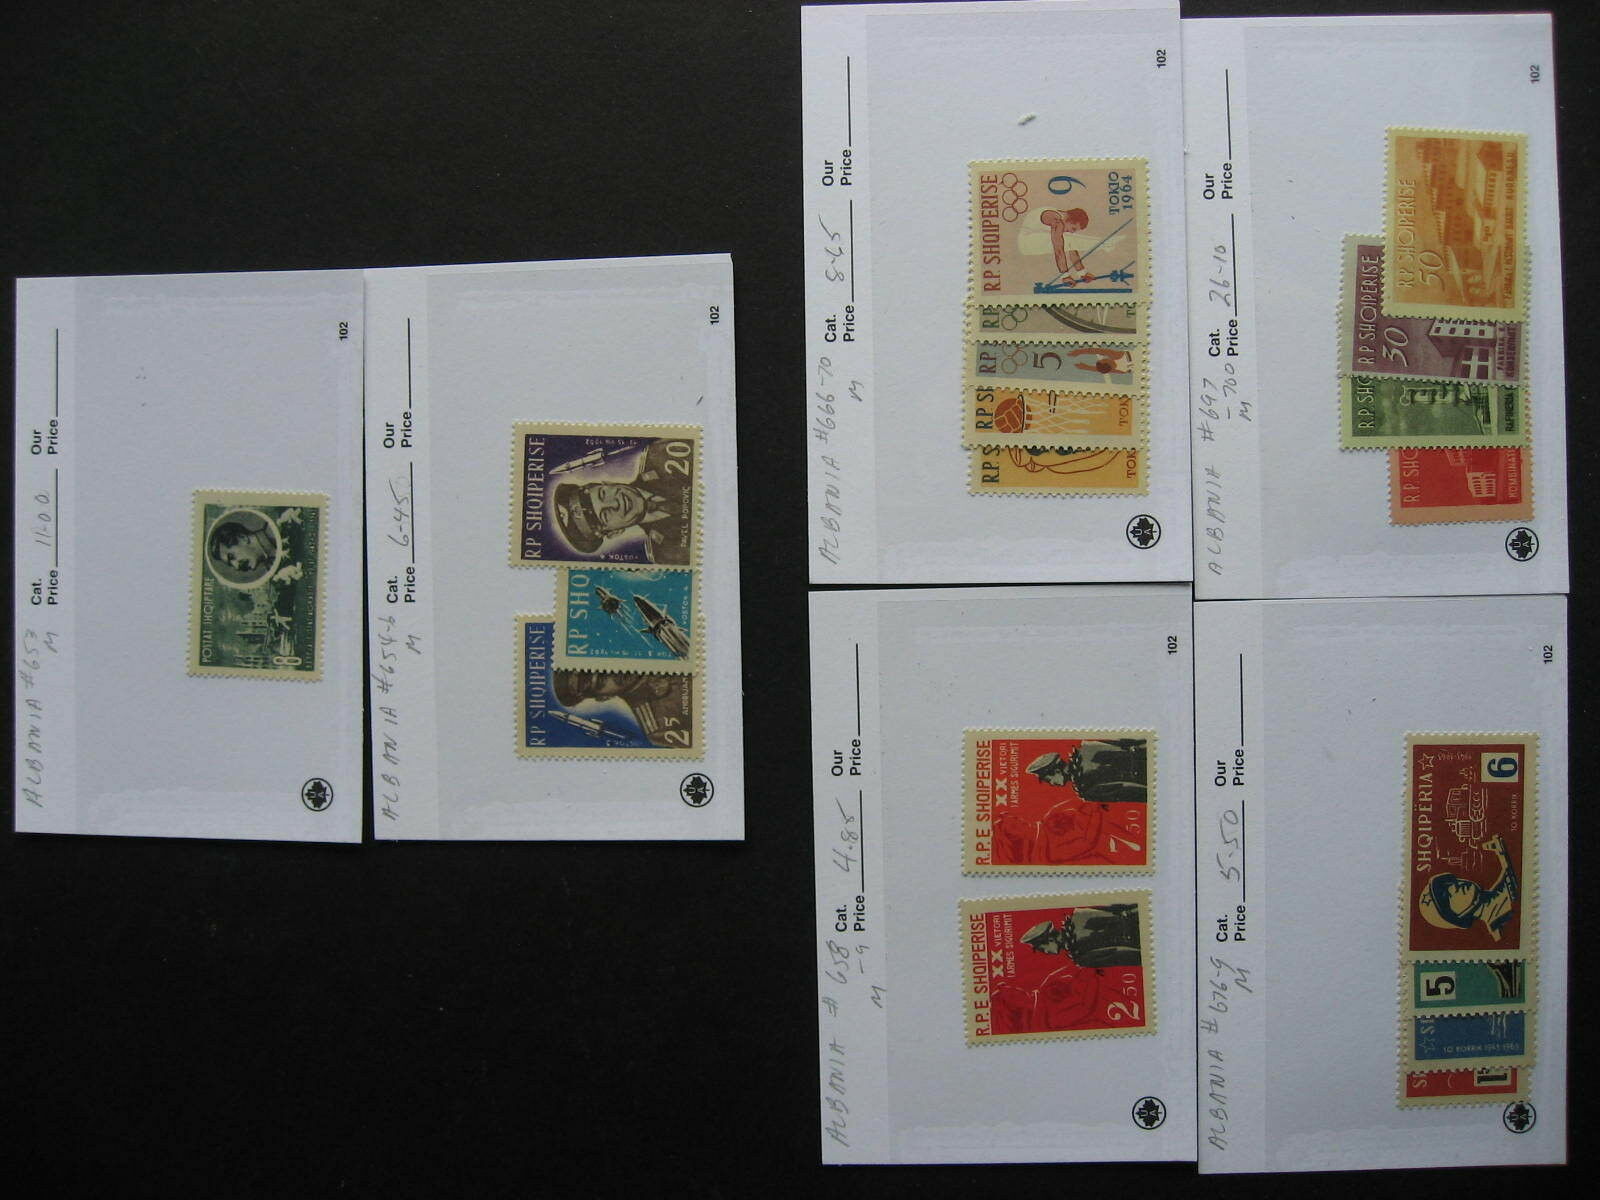 Hoard Breakup Sales Cards Albania Part 5of 8 Possible Misidentified & Mixed Cond